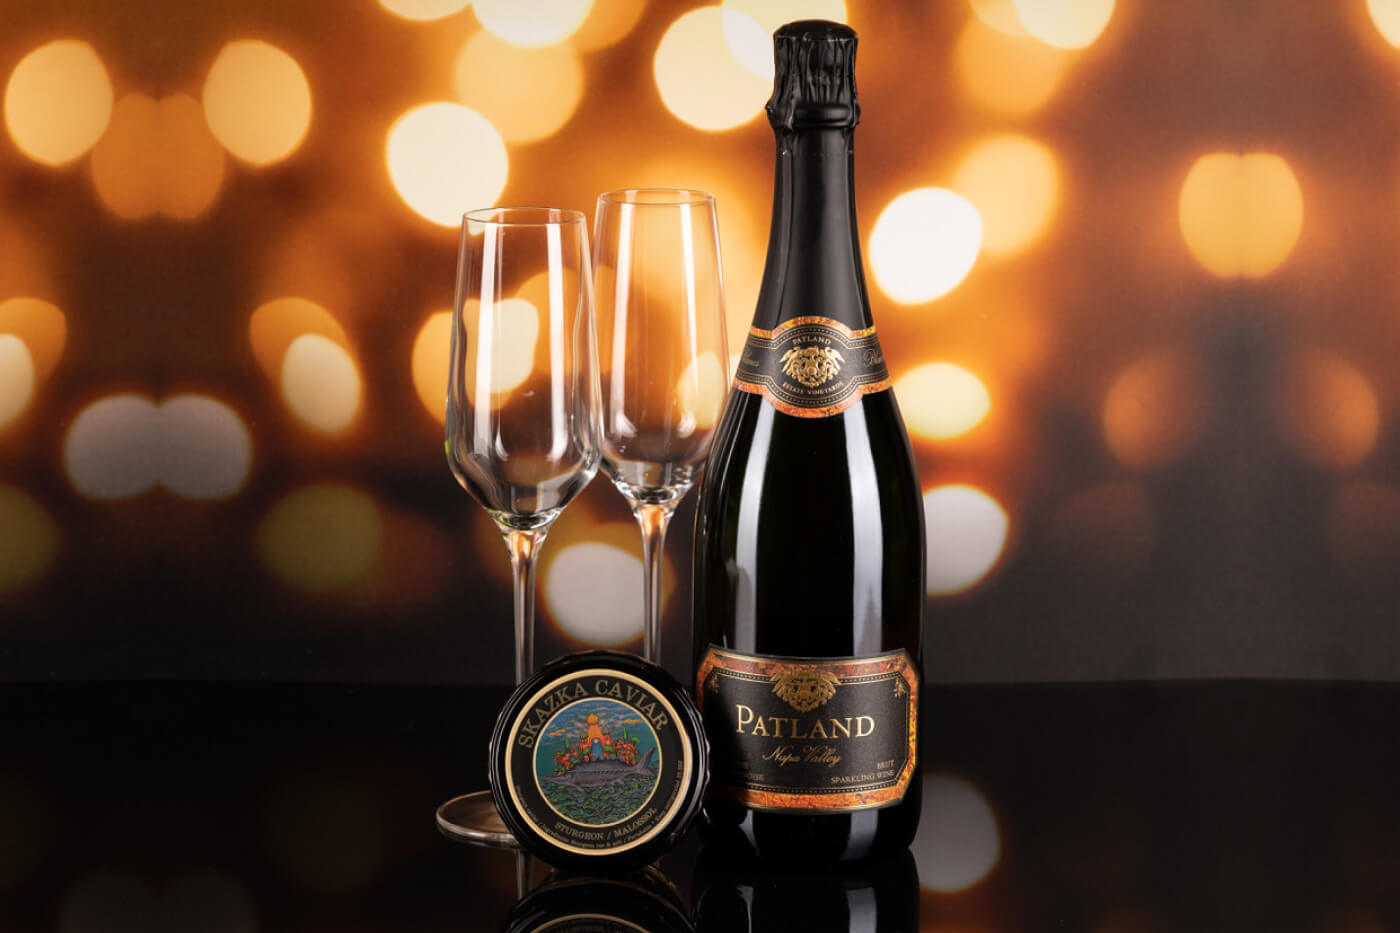 Champagne and caviar: the ultimate pairing